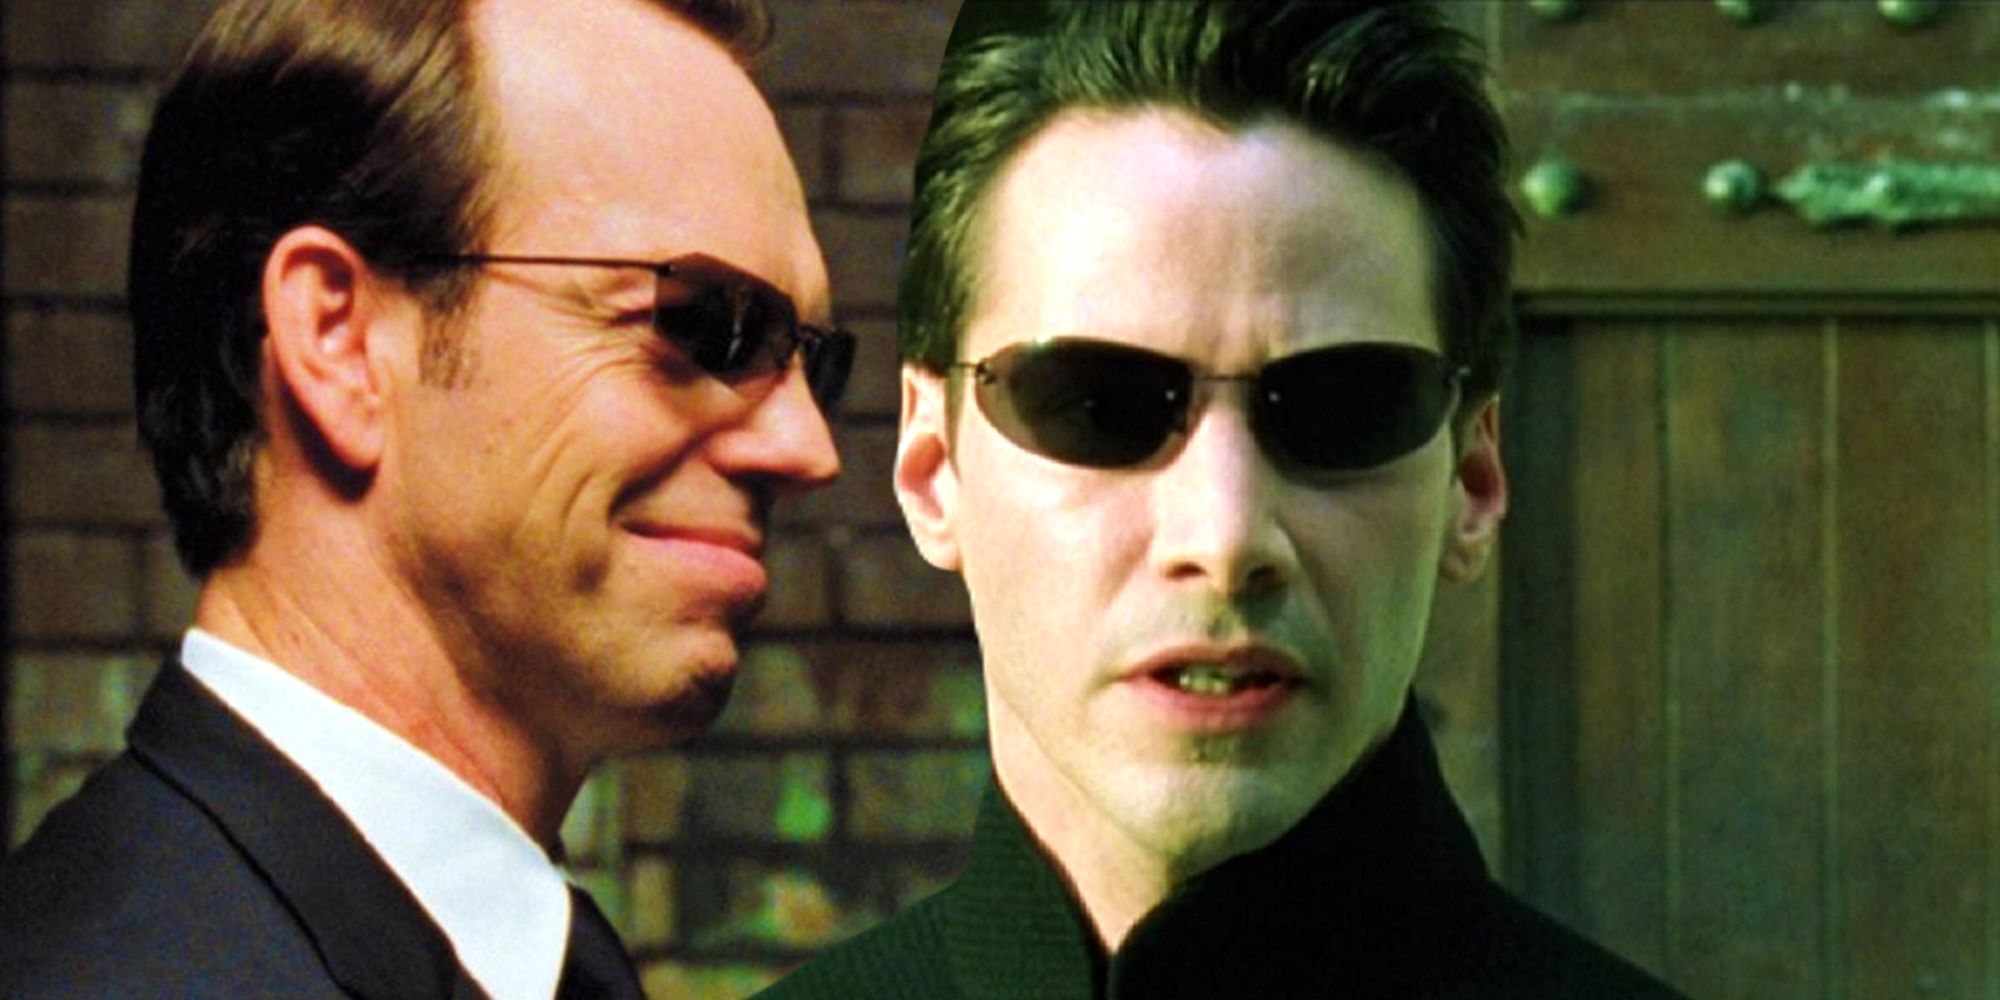 Smith and Neo in the Matrix movies